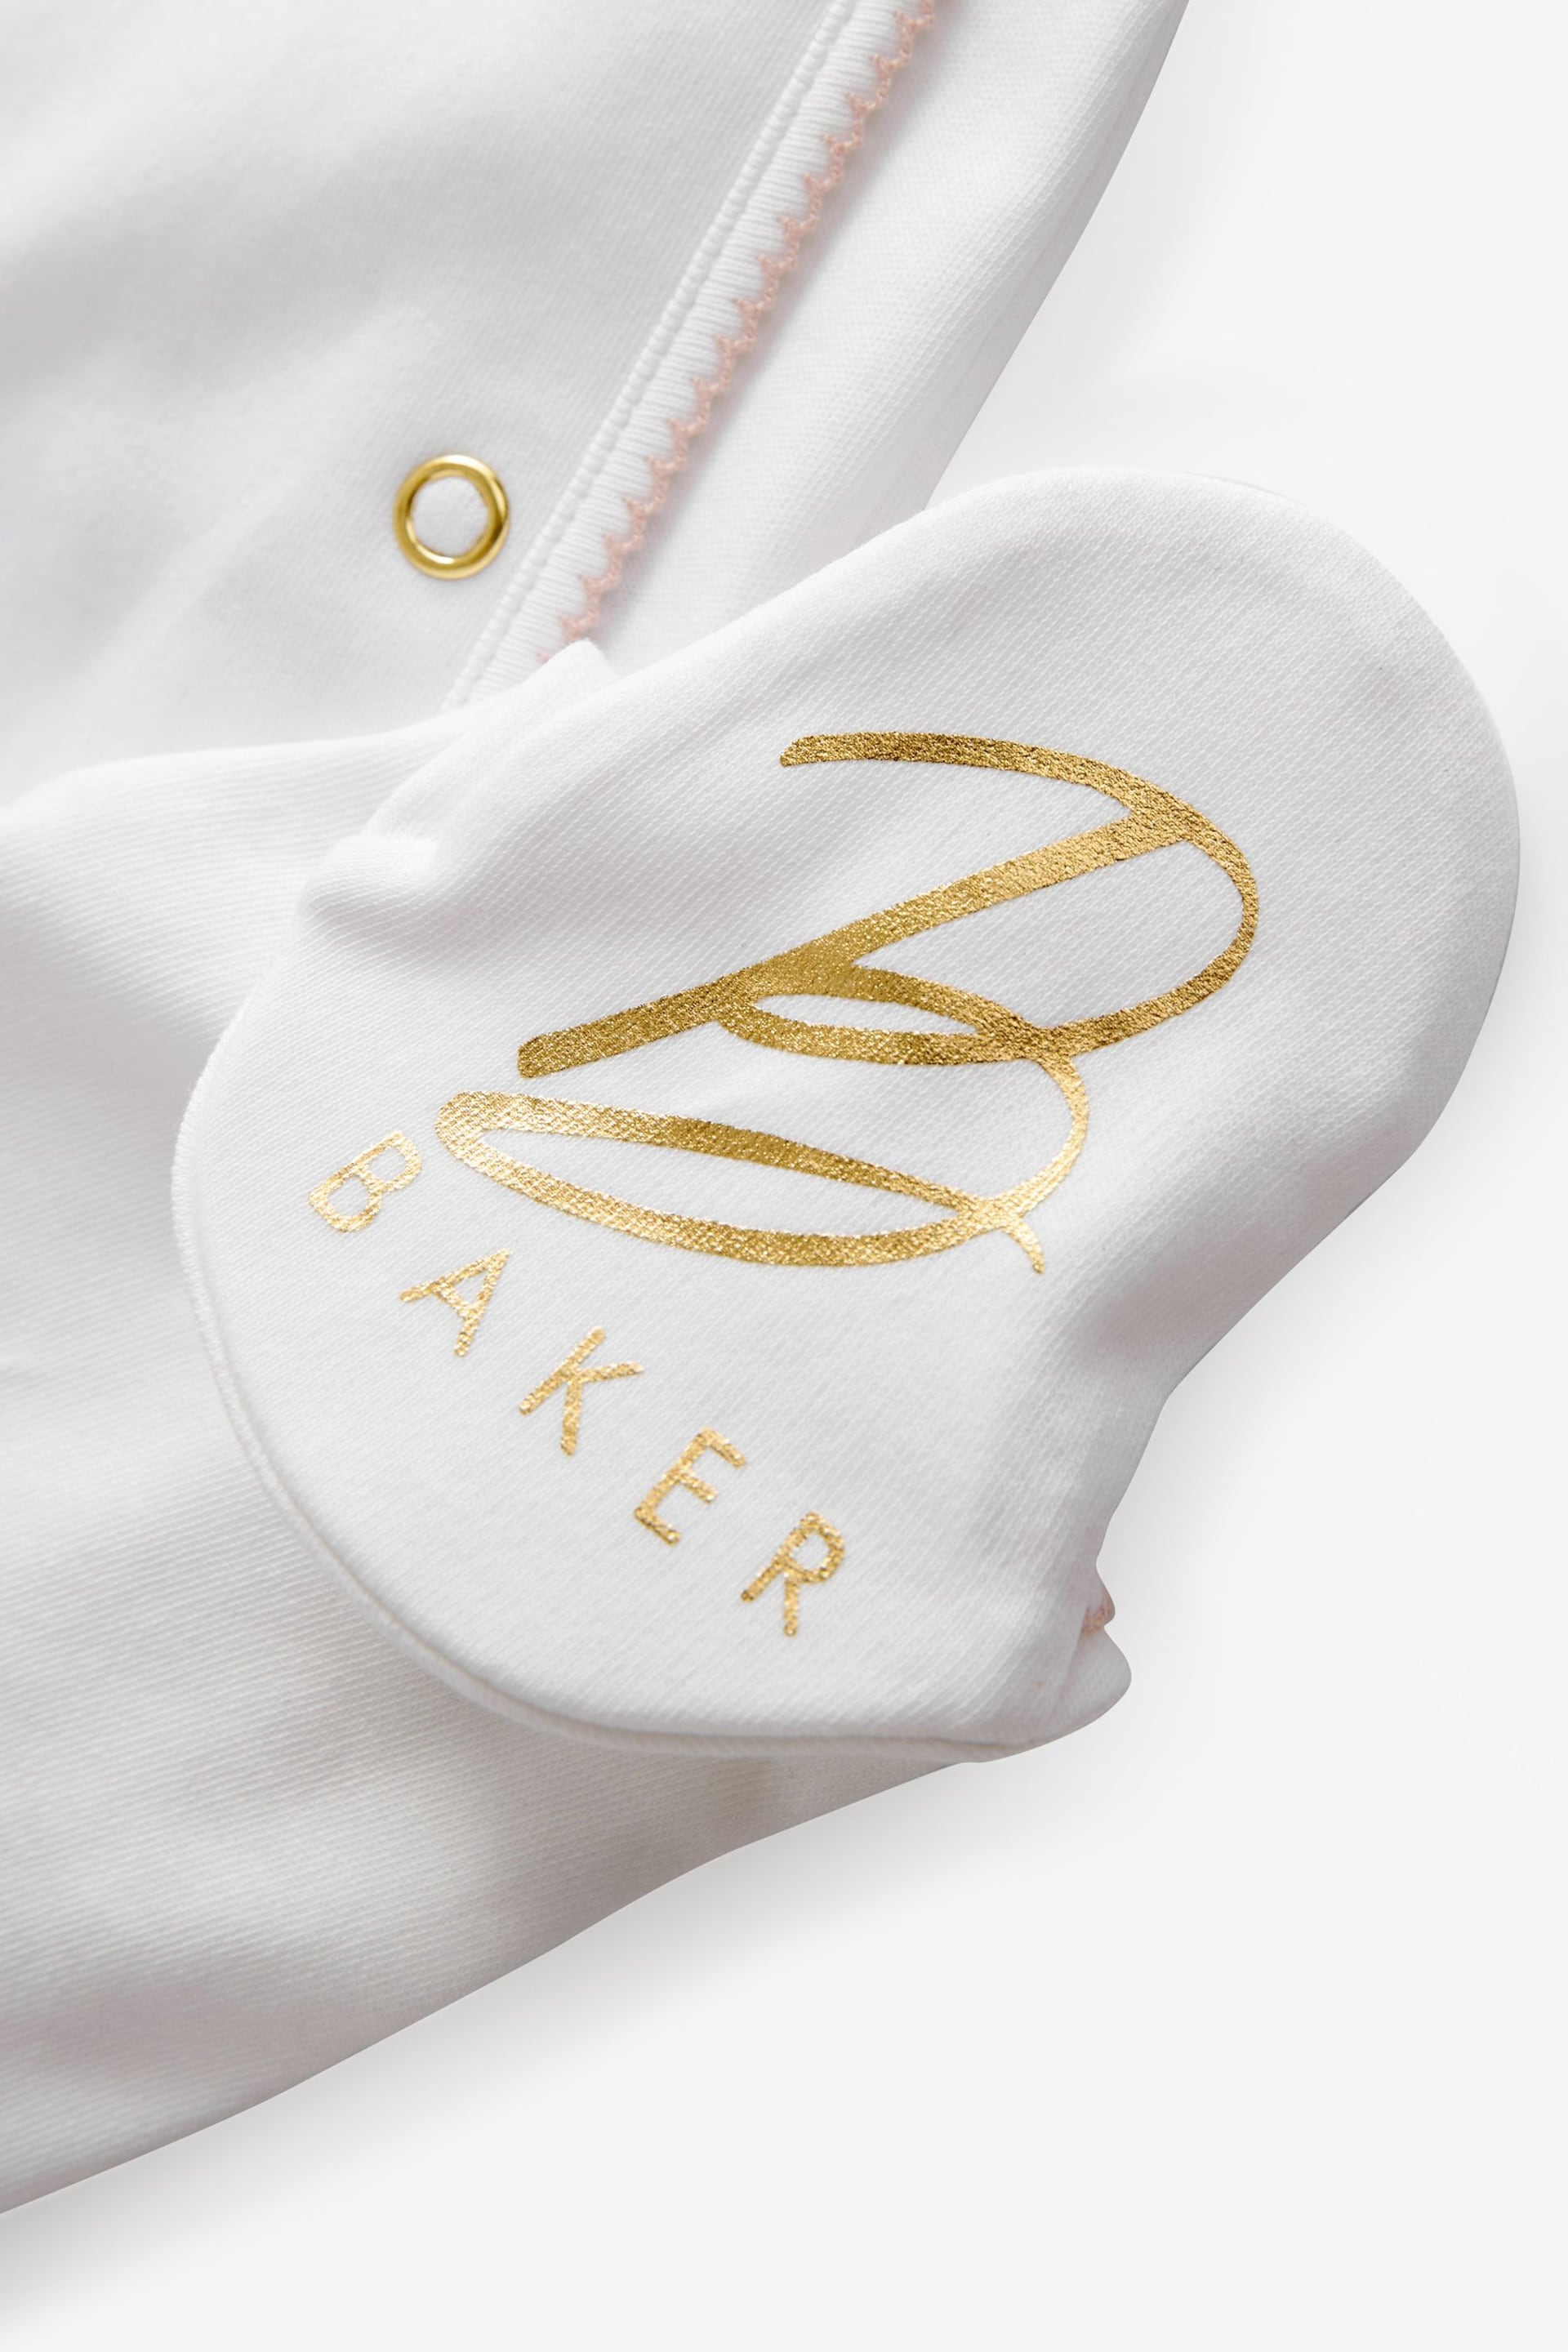 Baker by Ted Baker Babys First Eid Cotton White Sleepsuit - Image 7 of 7